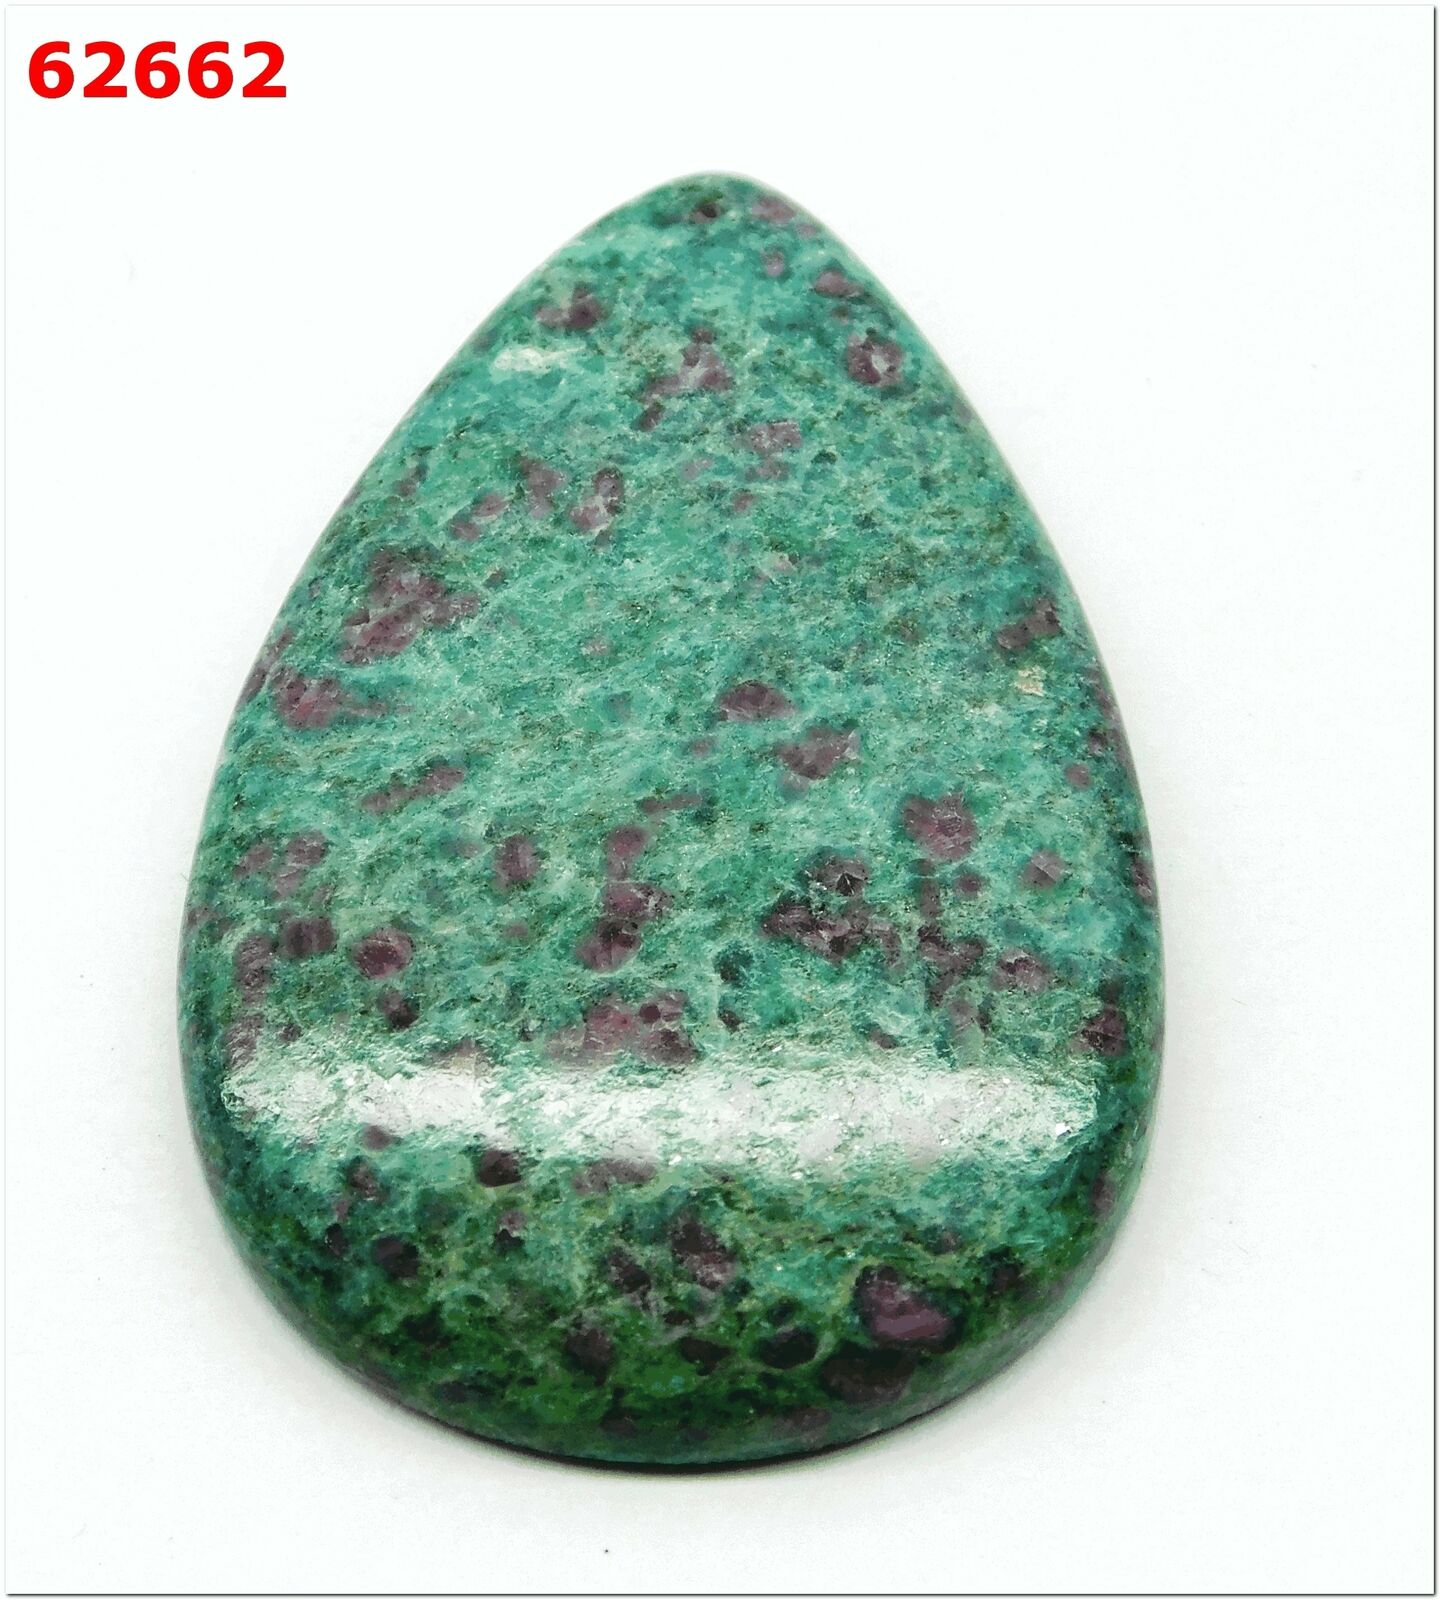 Ruby Fucsite Cabochon Naturalruby Fucsite Jewellery Ruby Fucsite 128cts.62662